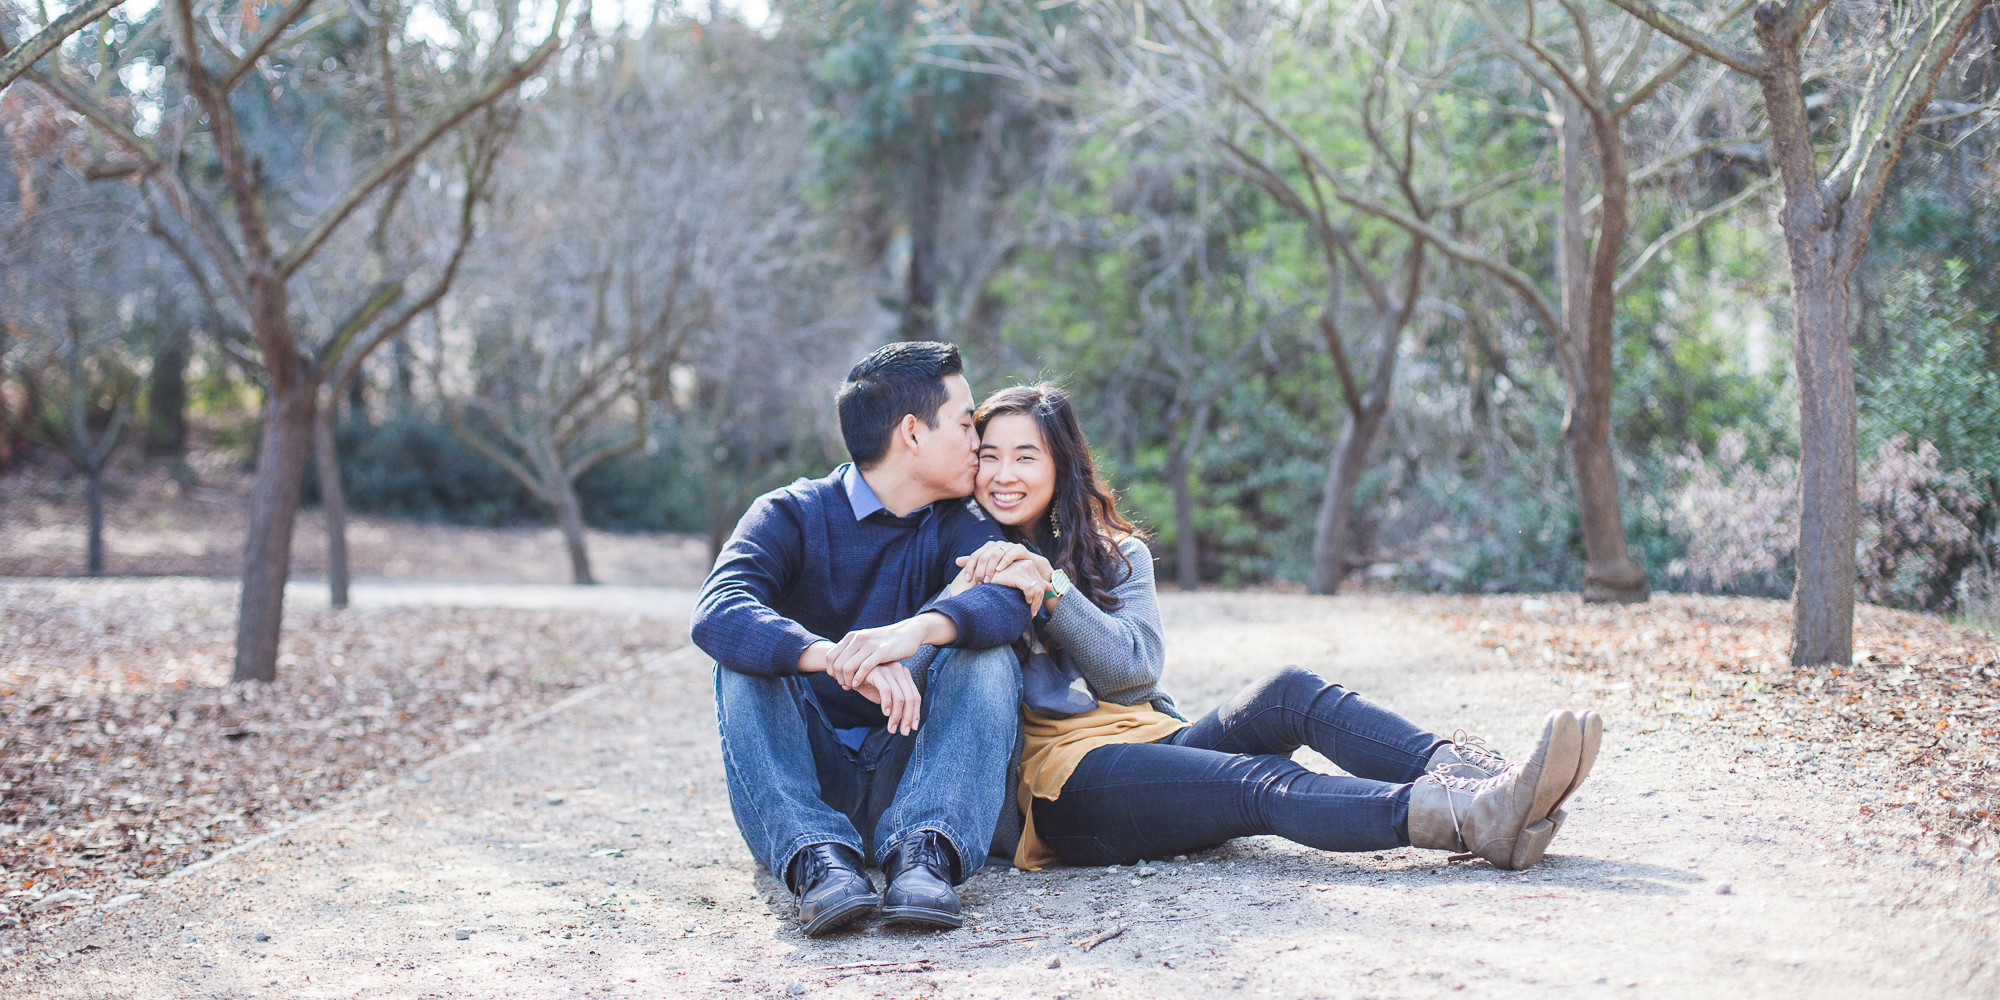 A Starbucks-Themed Surprise Proposal: Andy & Christine | Schabarum Park in Rowland Heights, CA